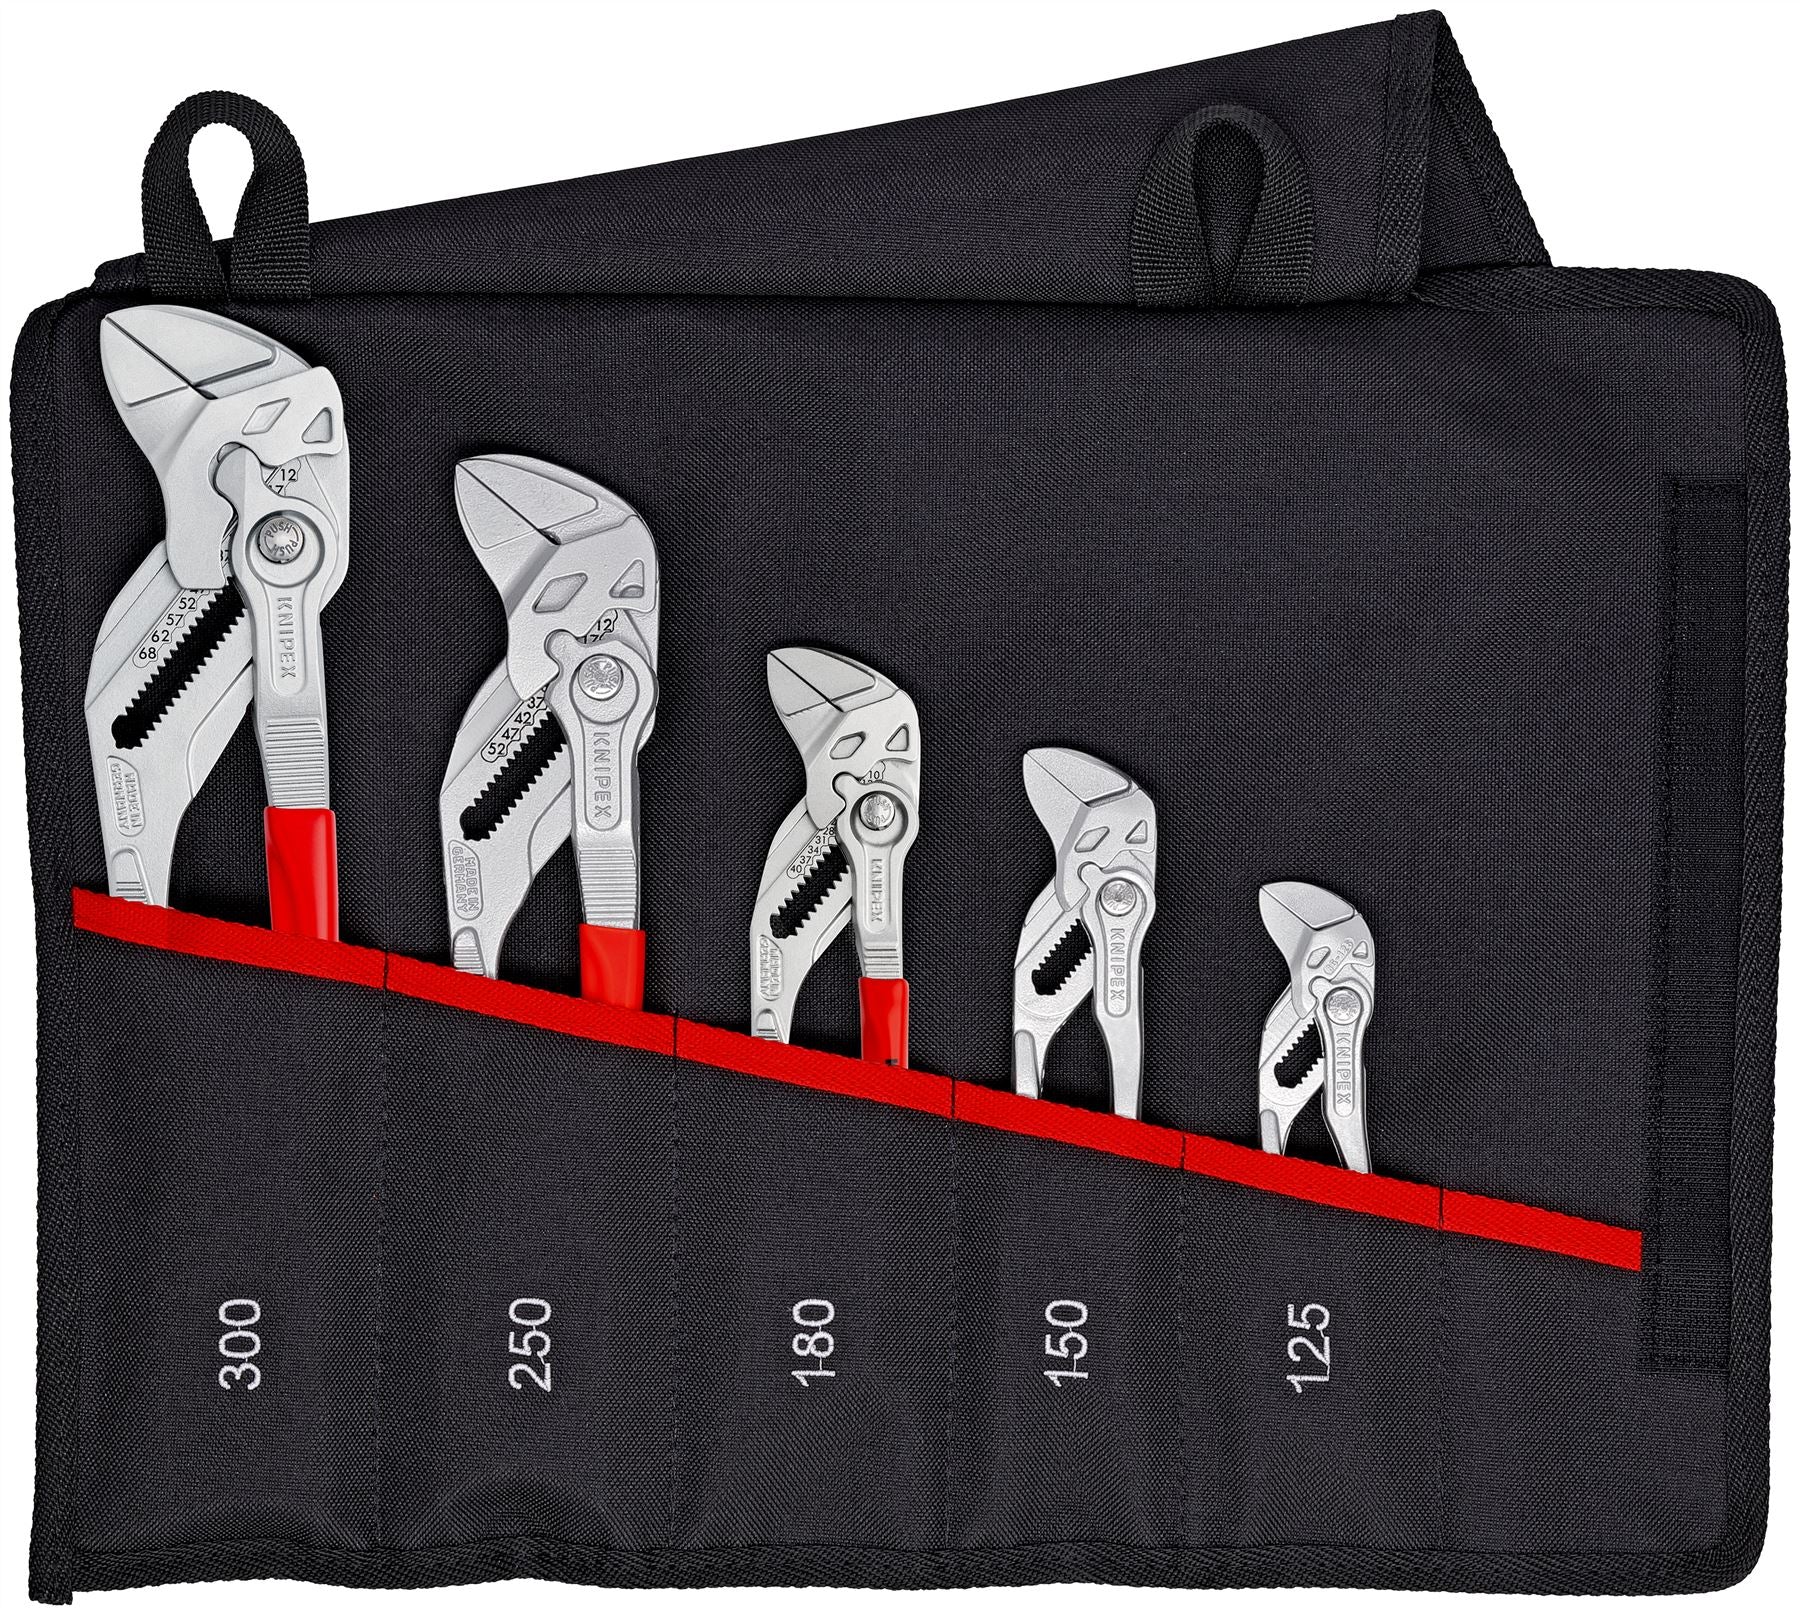 KNIPEX Pliers Wrench Set 5 Piece in Tool Roll Chrome Plated 125-300mm 00 19 55 S4